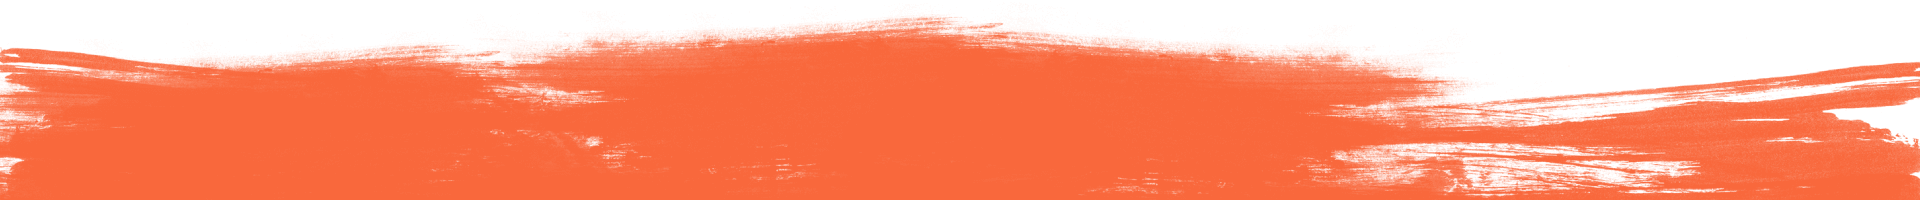 A black and orange background with some type of pattern